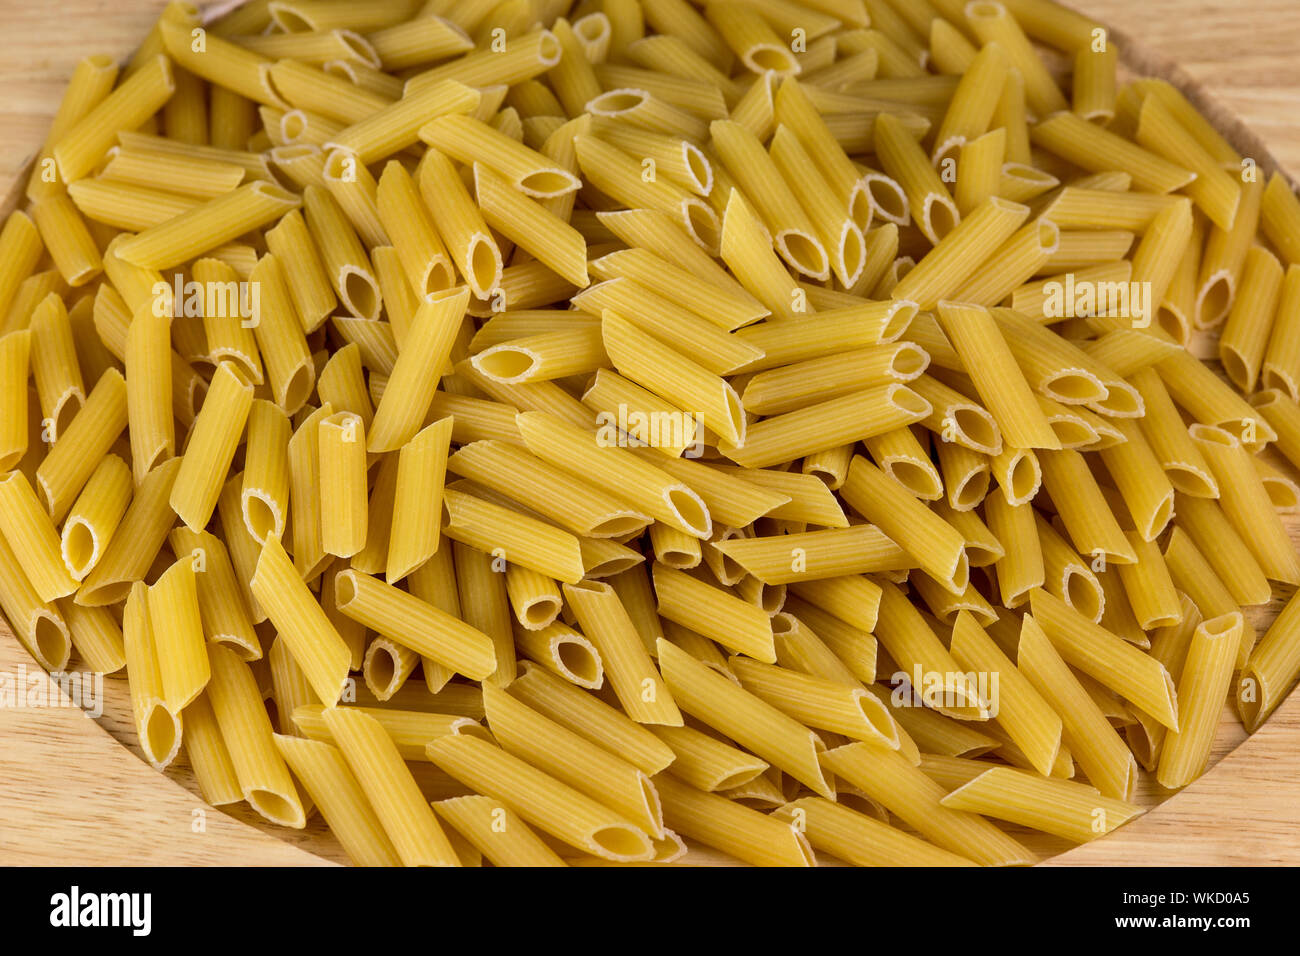 Uncooked penne pasta tubes on a wooden platter Stock Photo